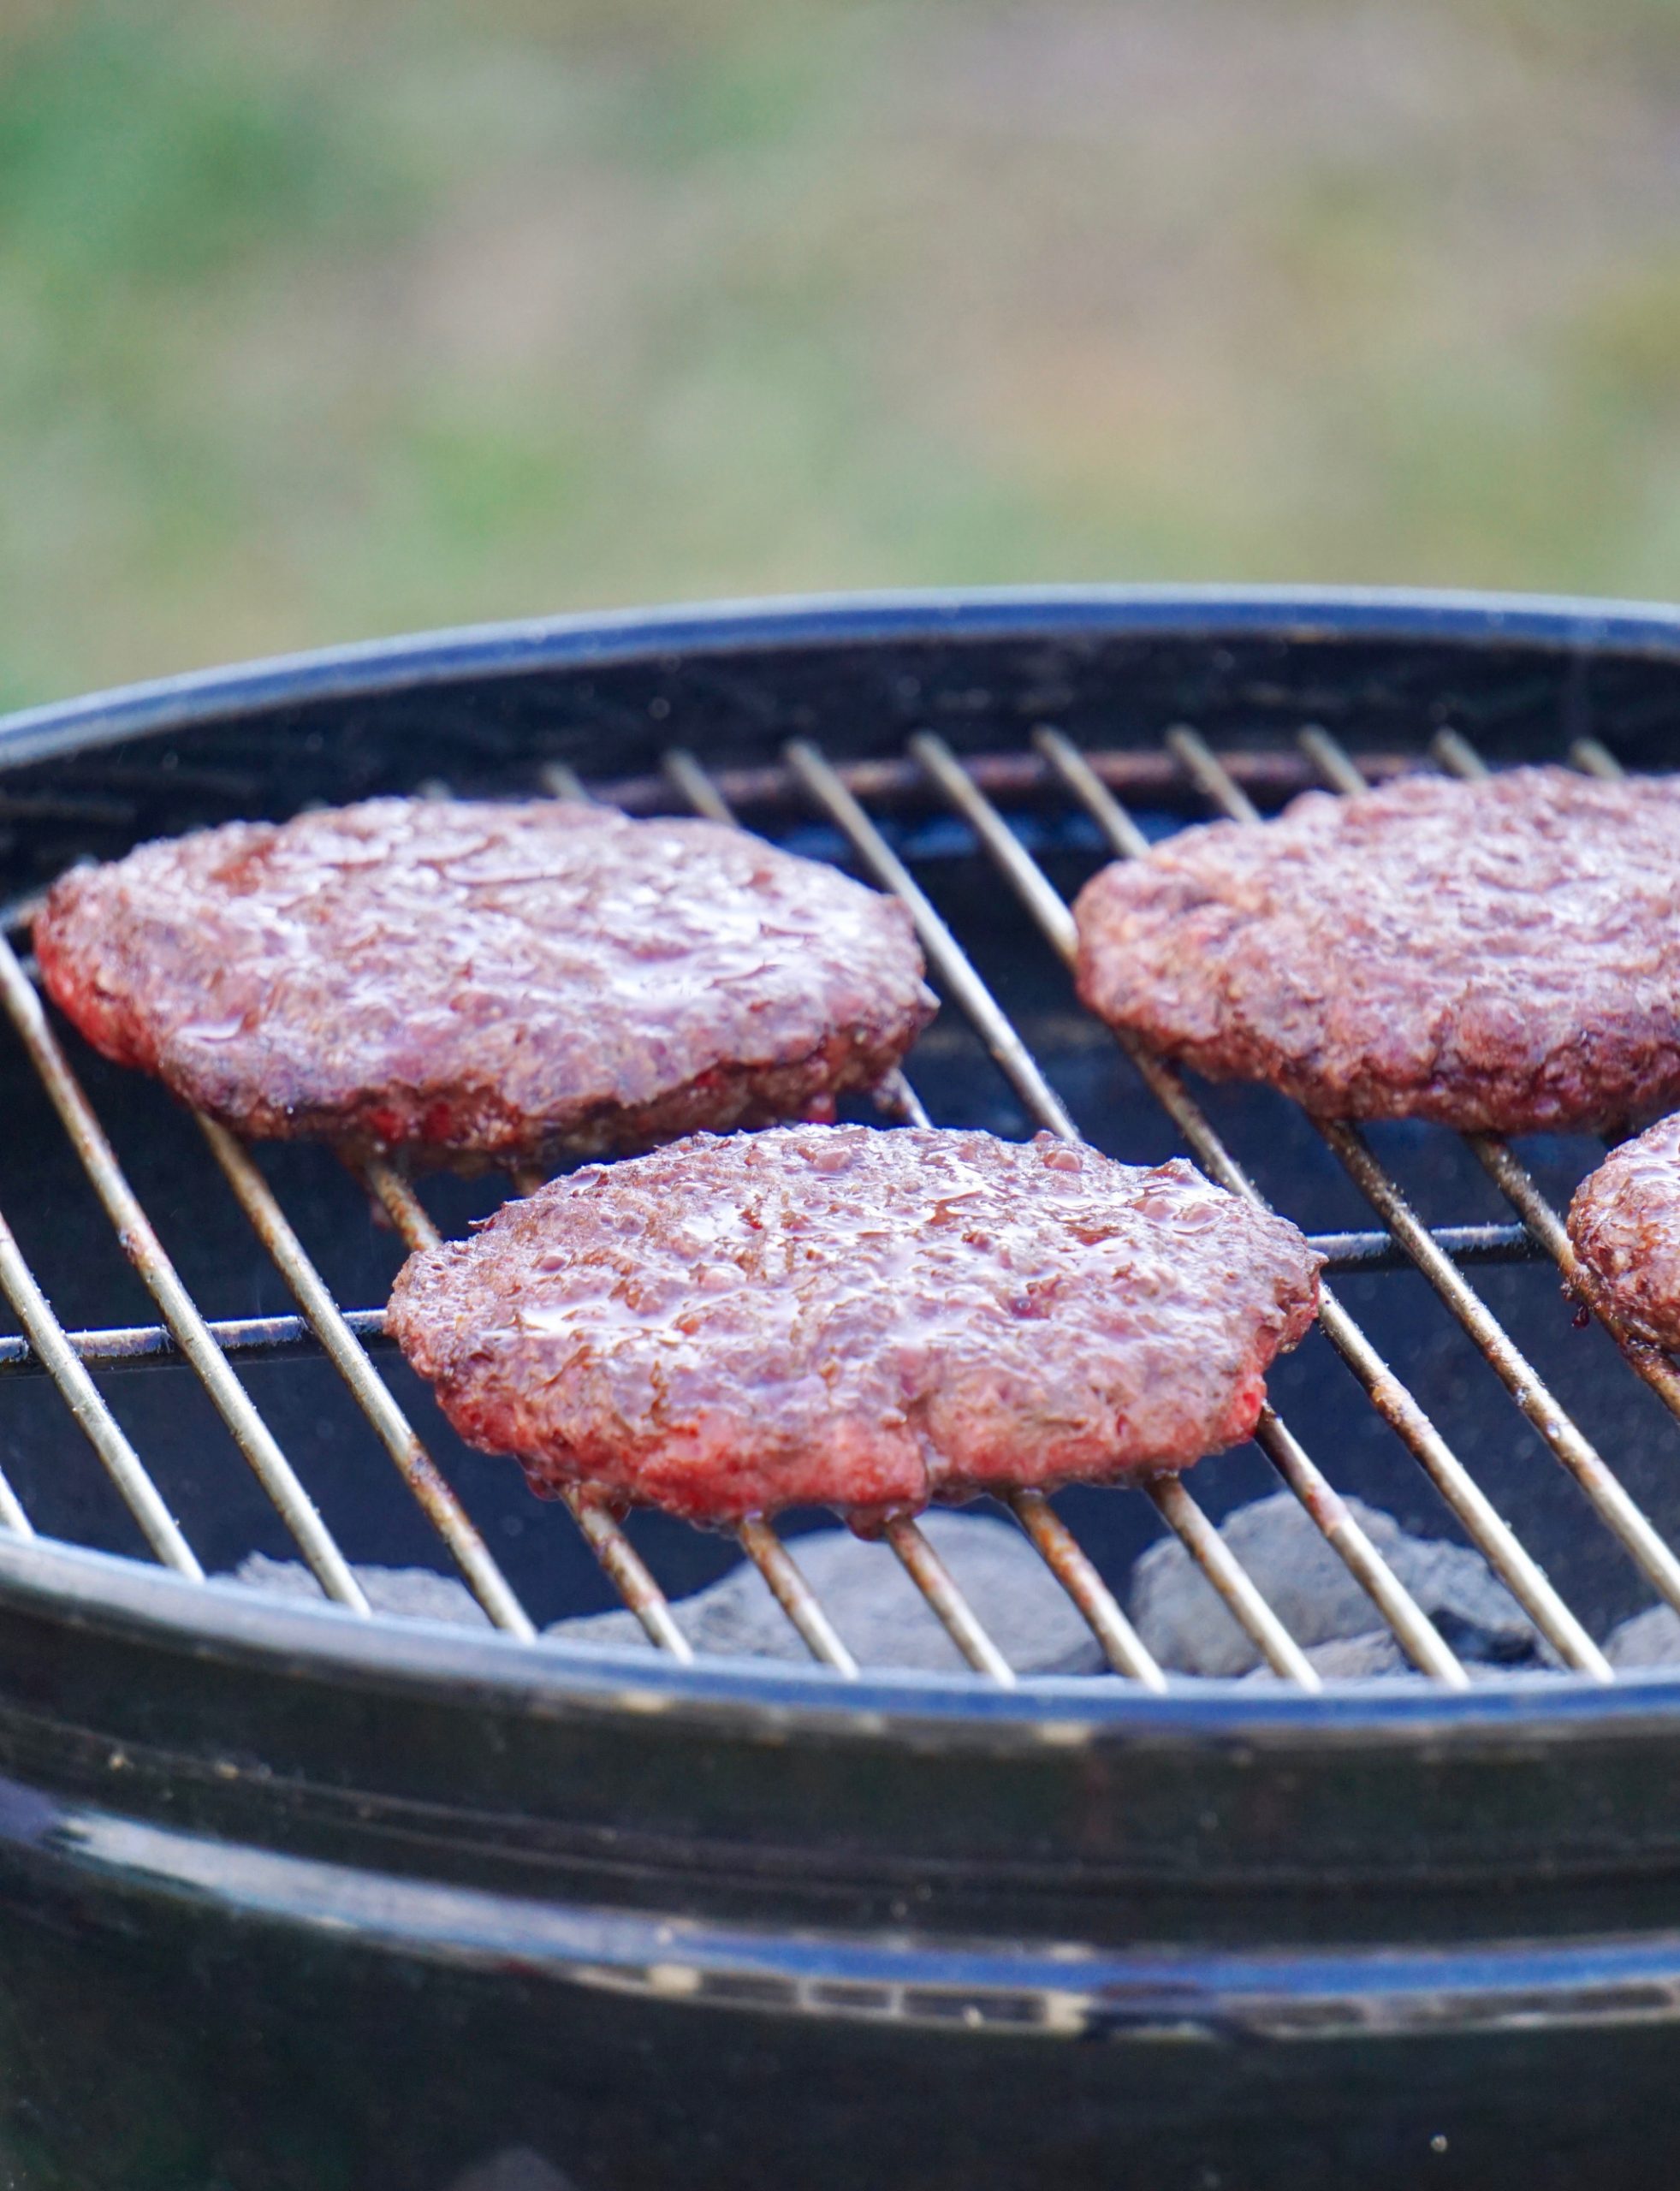 Best tips for grilling hamburgers